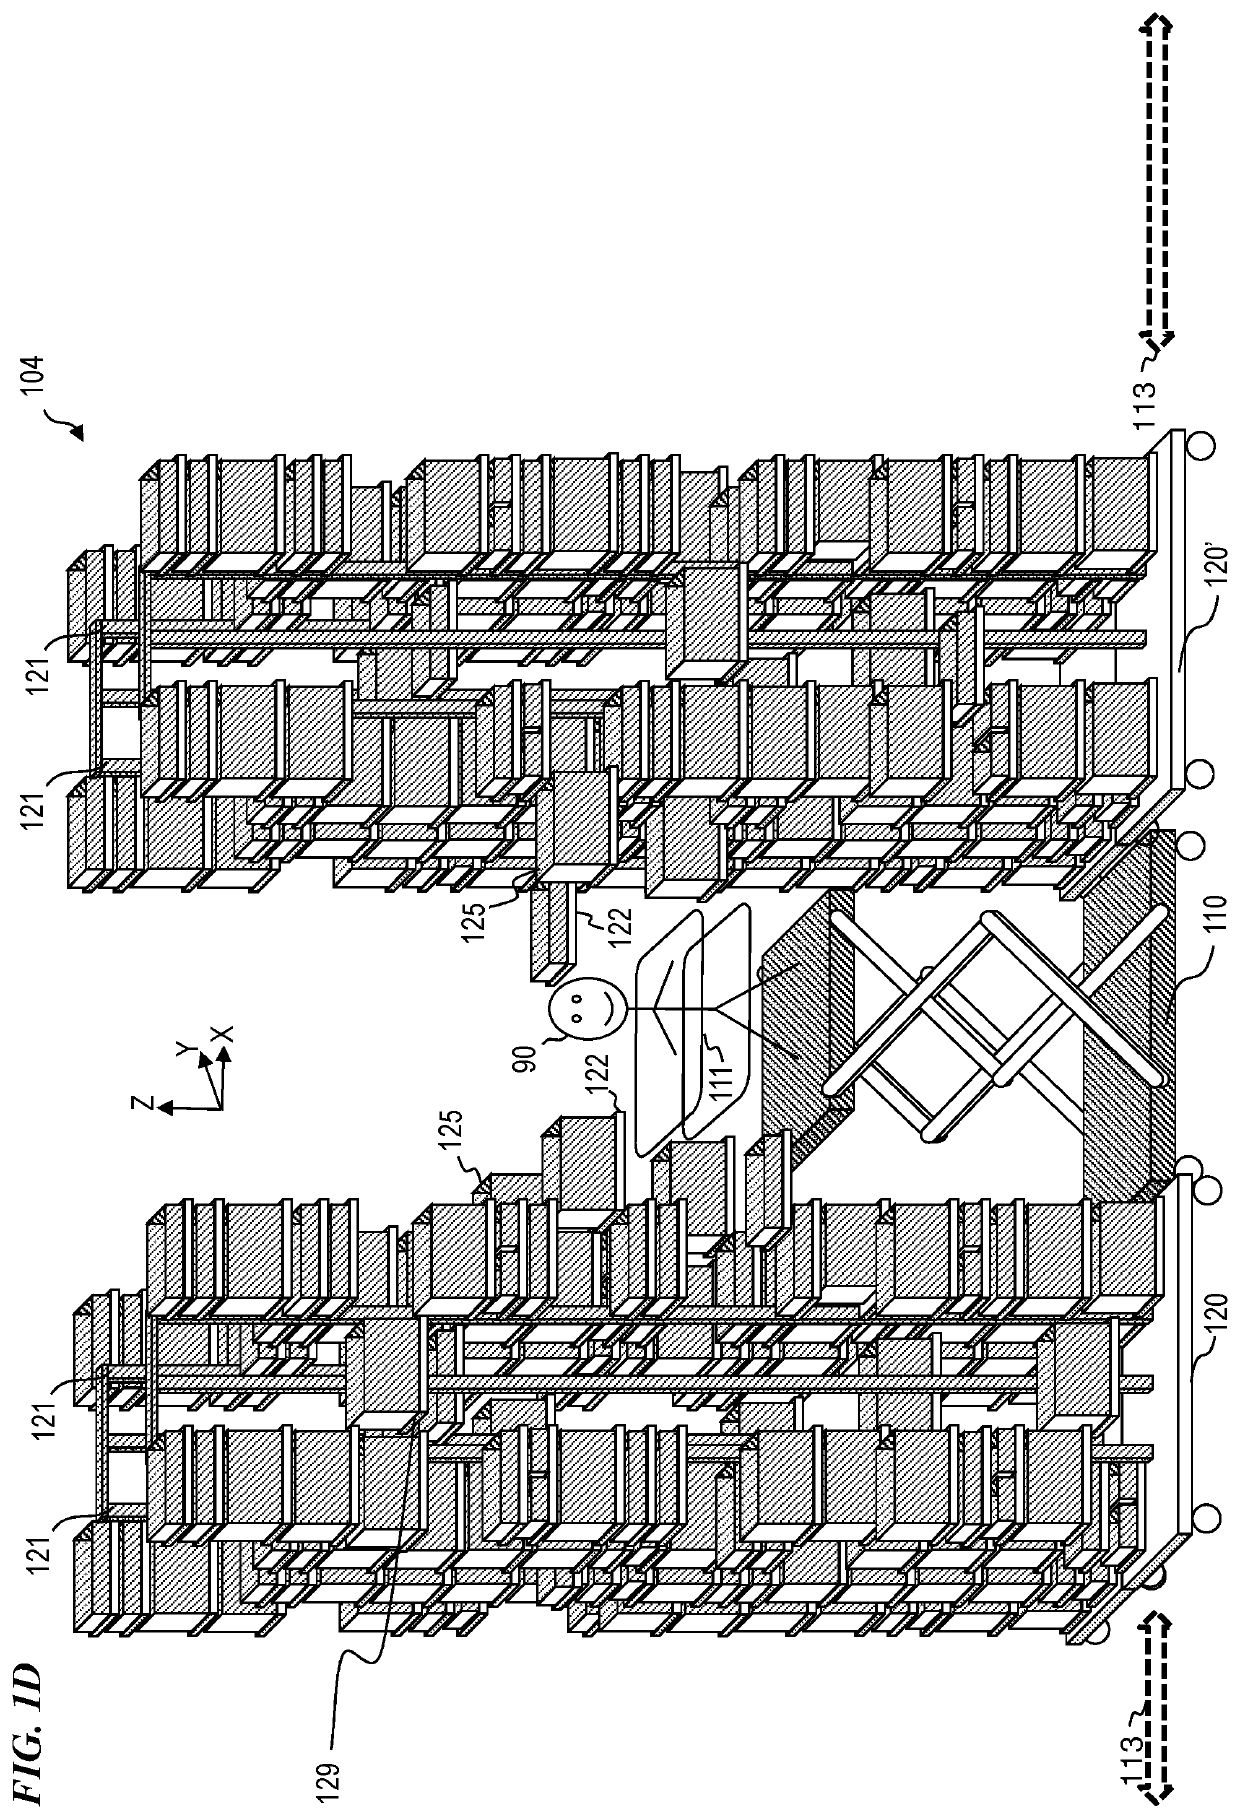 Automated warehouse fulfillment system and method of operation